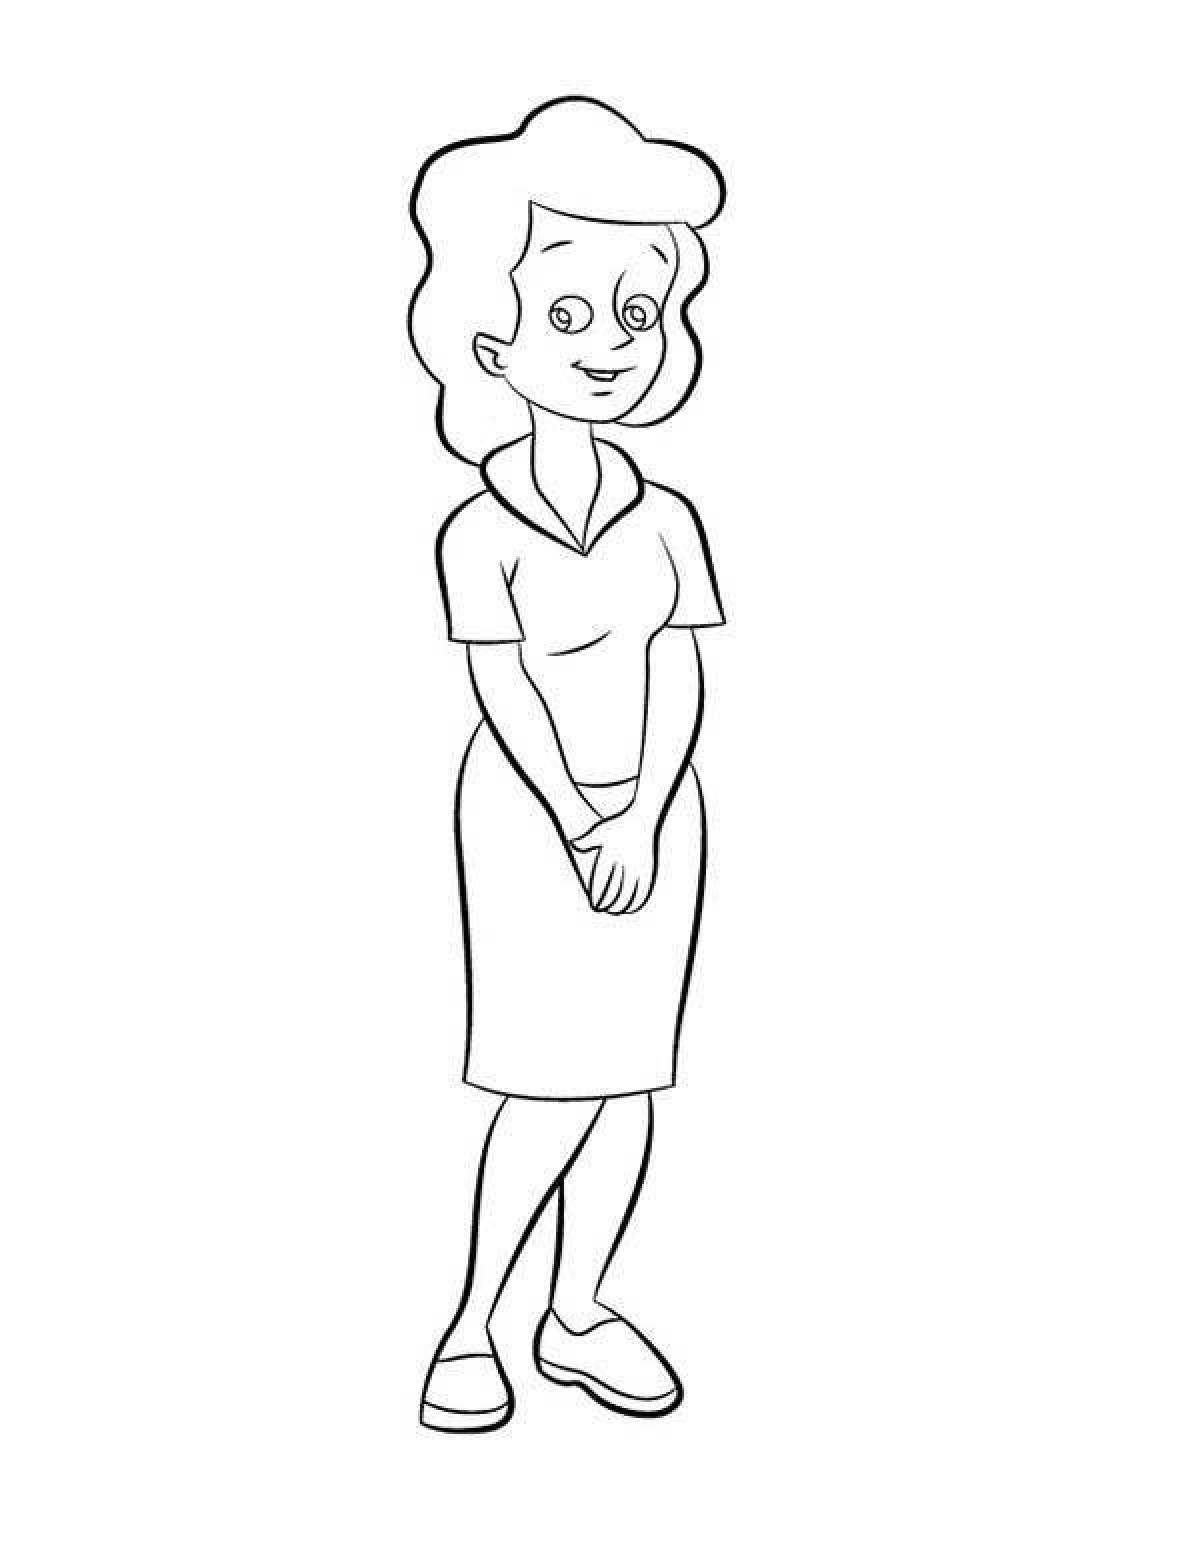 Adorable mom coloring book for kids